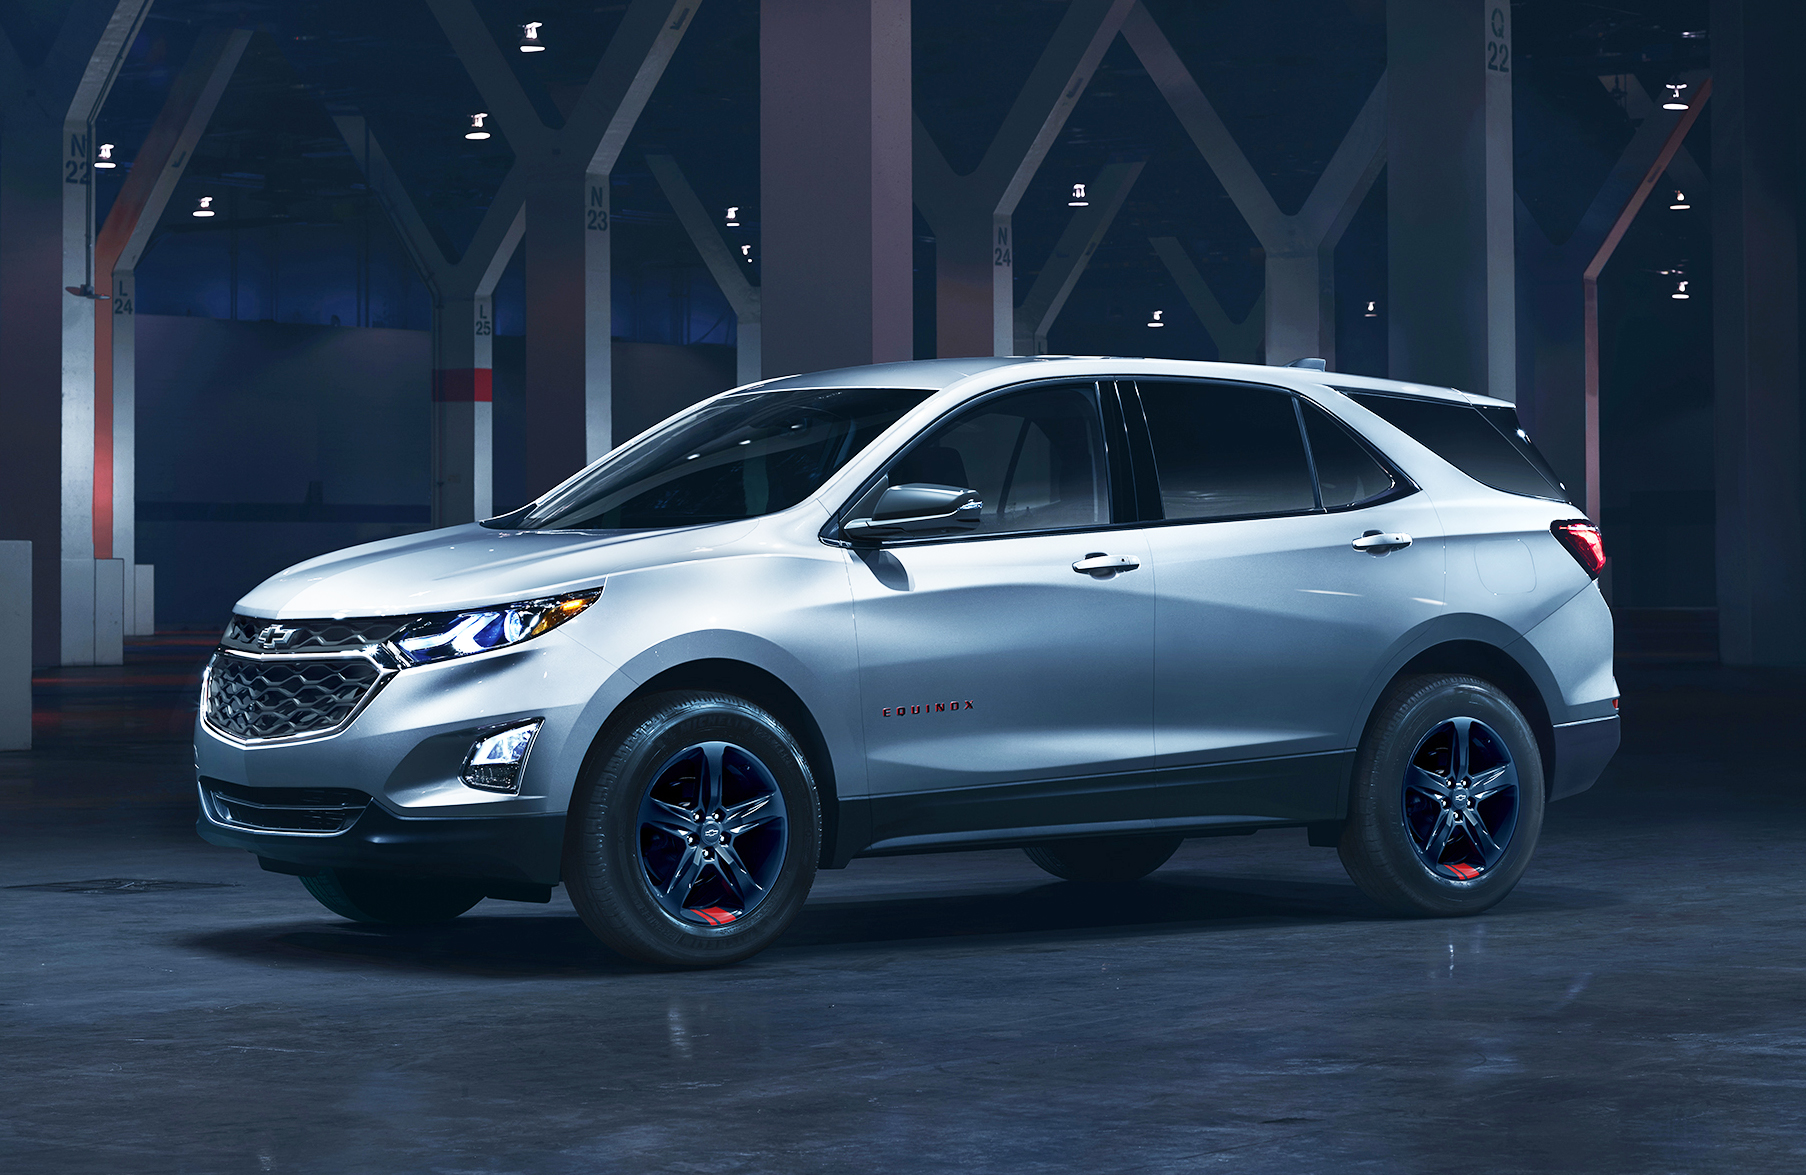 Our list of diesel cars includes the Chevrolet Equinox